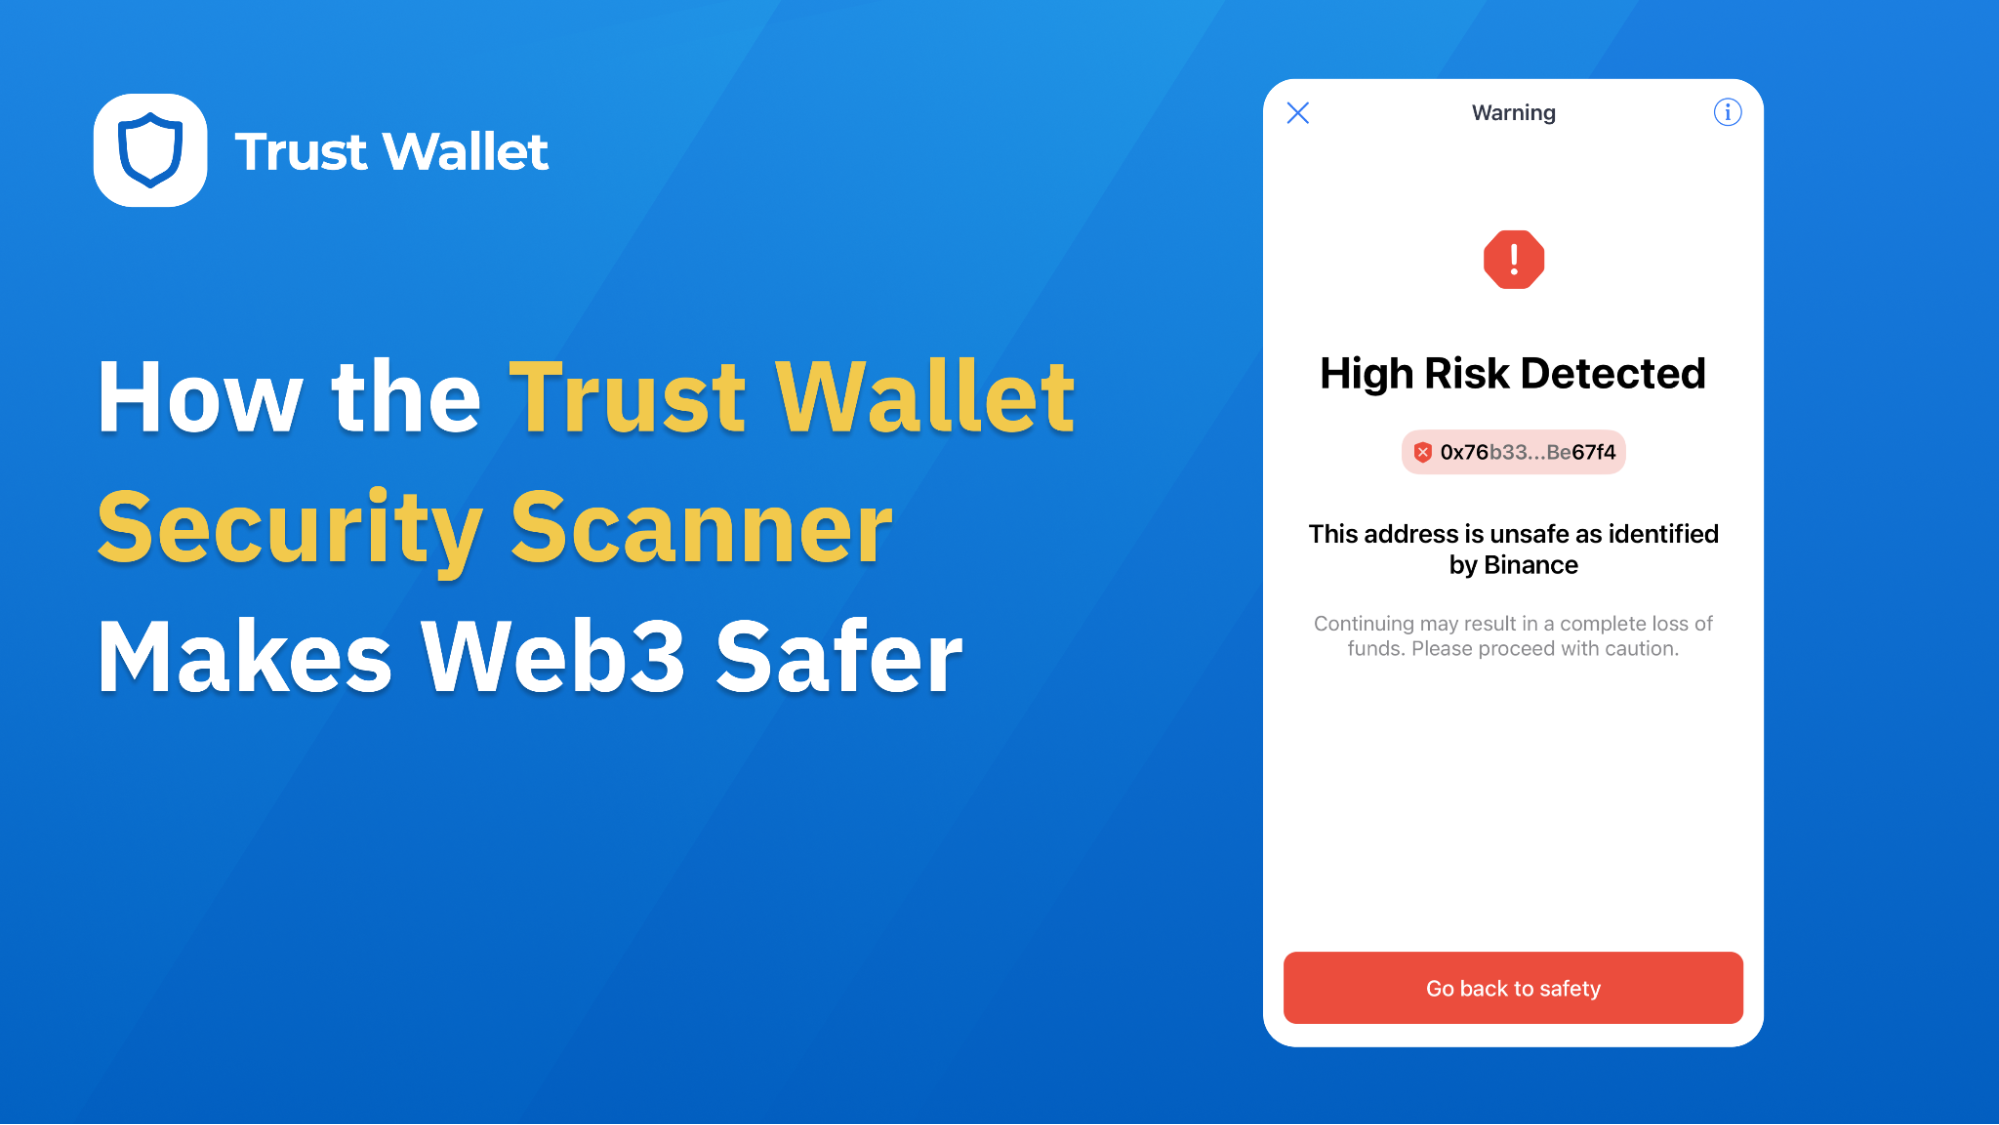 How the Trust Wallet Security Scanner Makes Web3 Safer